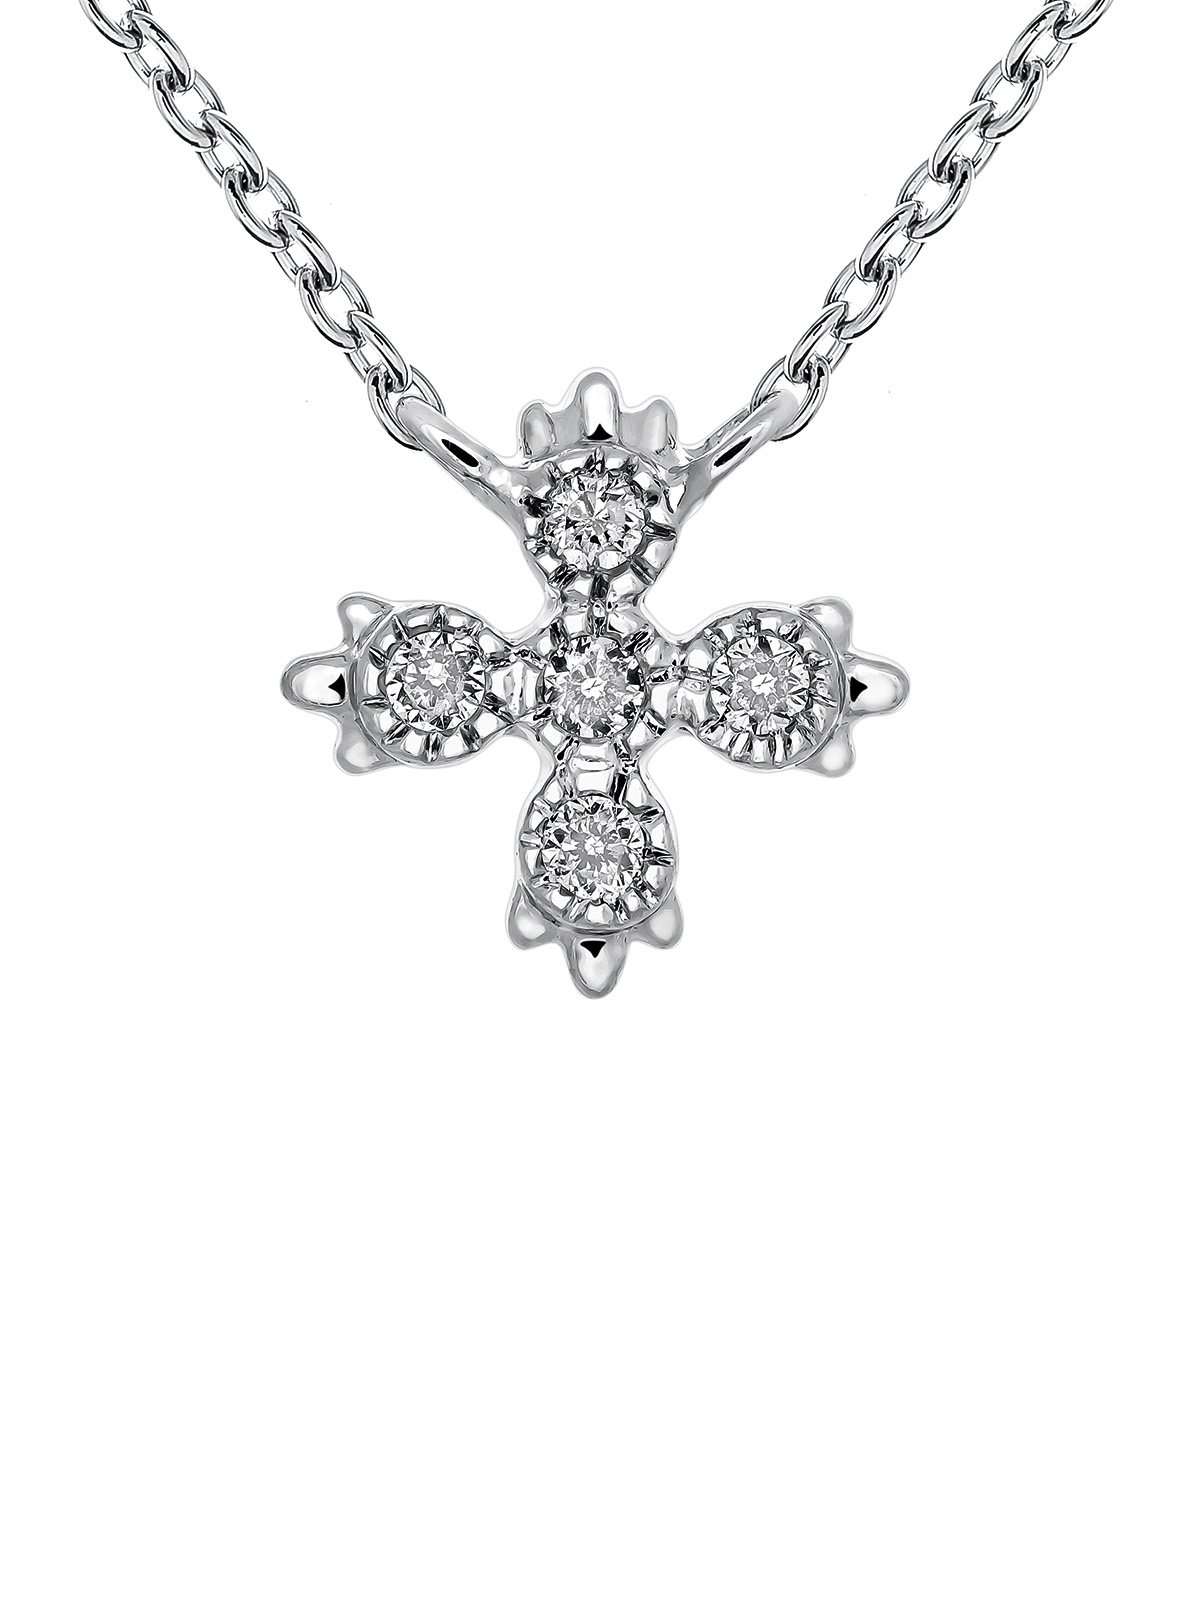 9K white gold pendant with cross featuring 0.03 cts white diamonds.